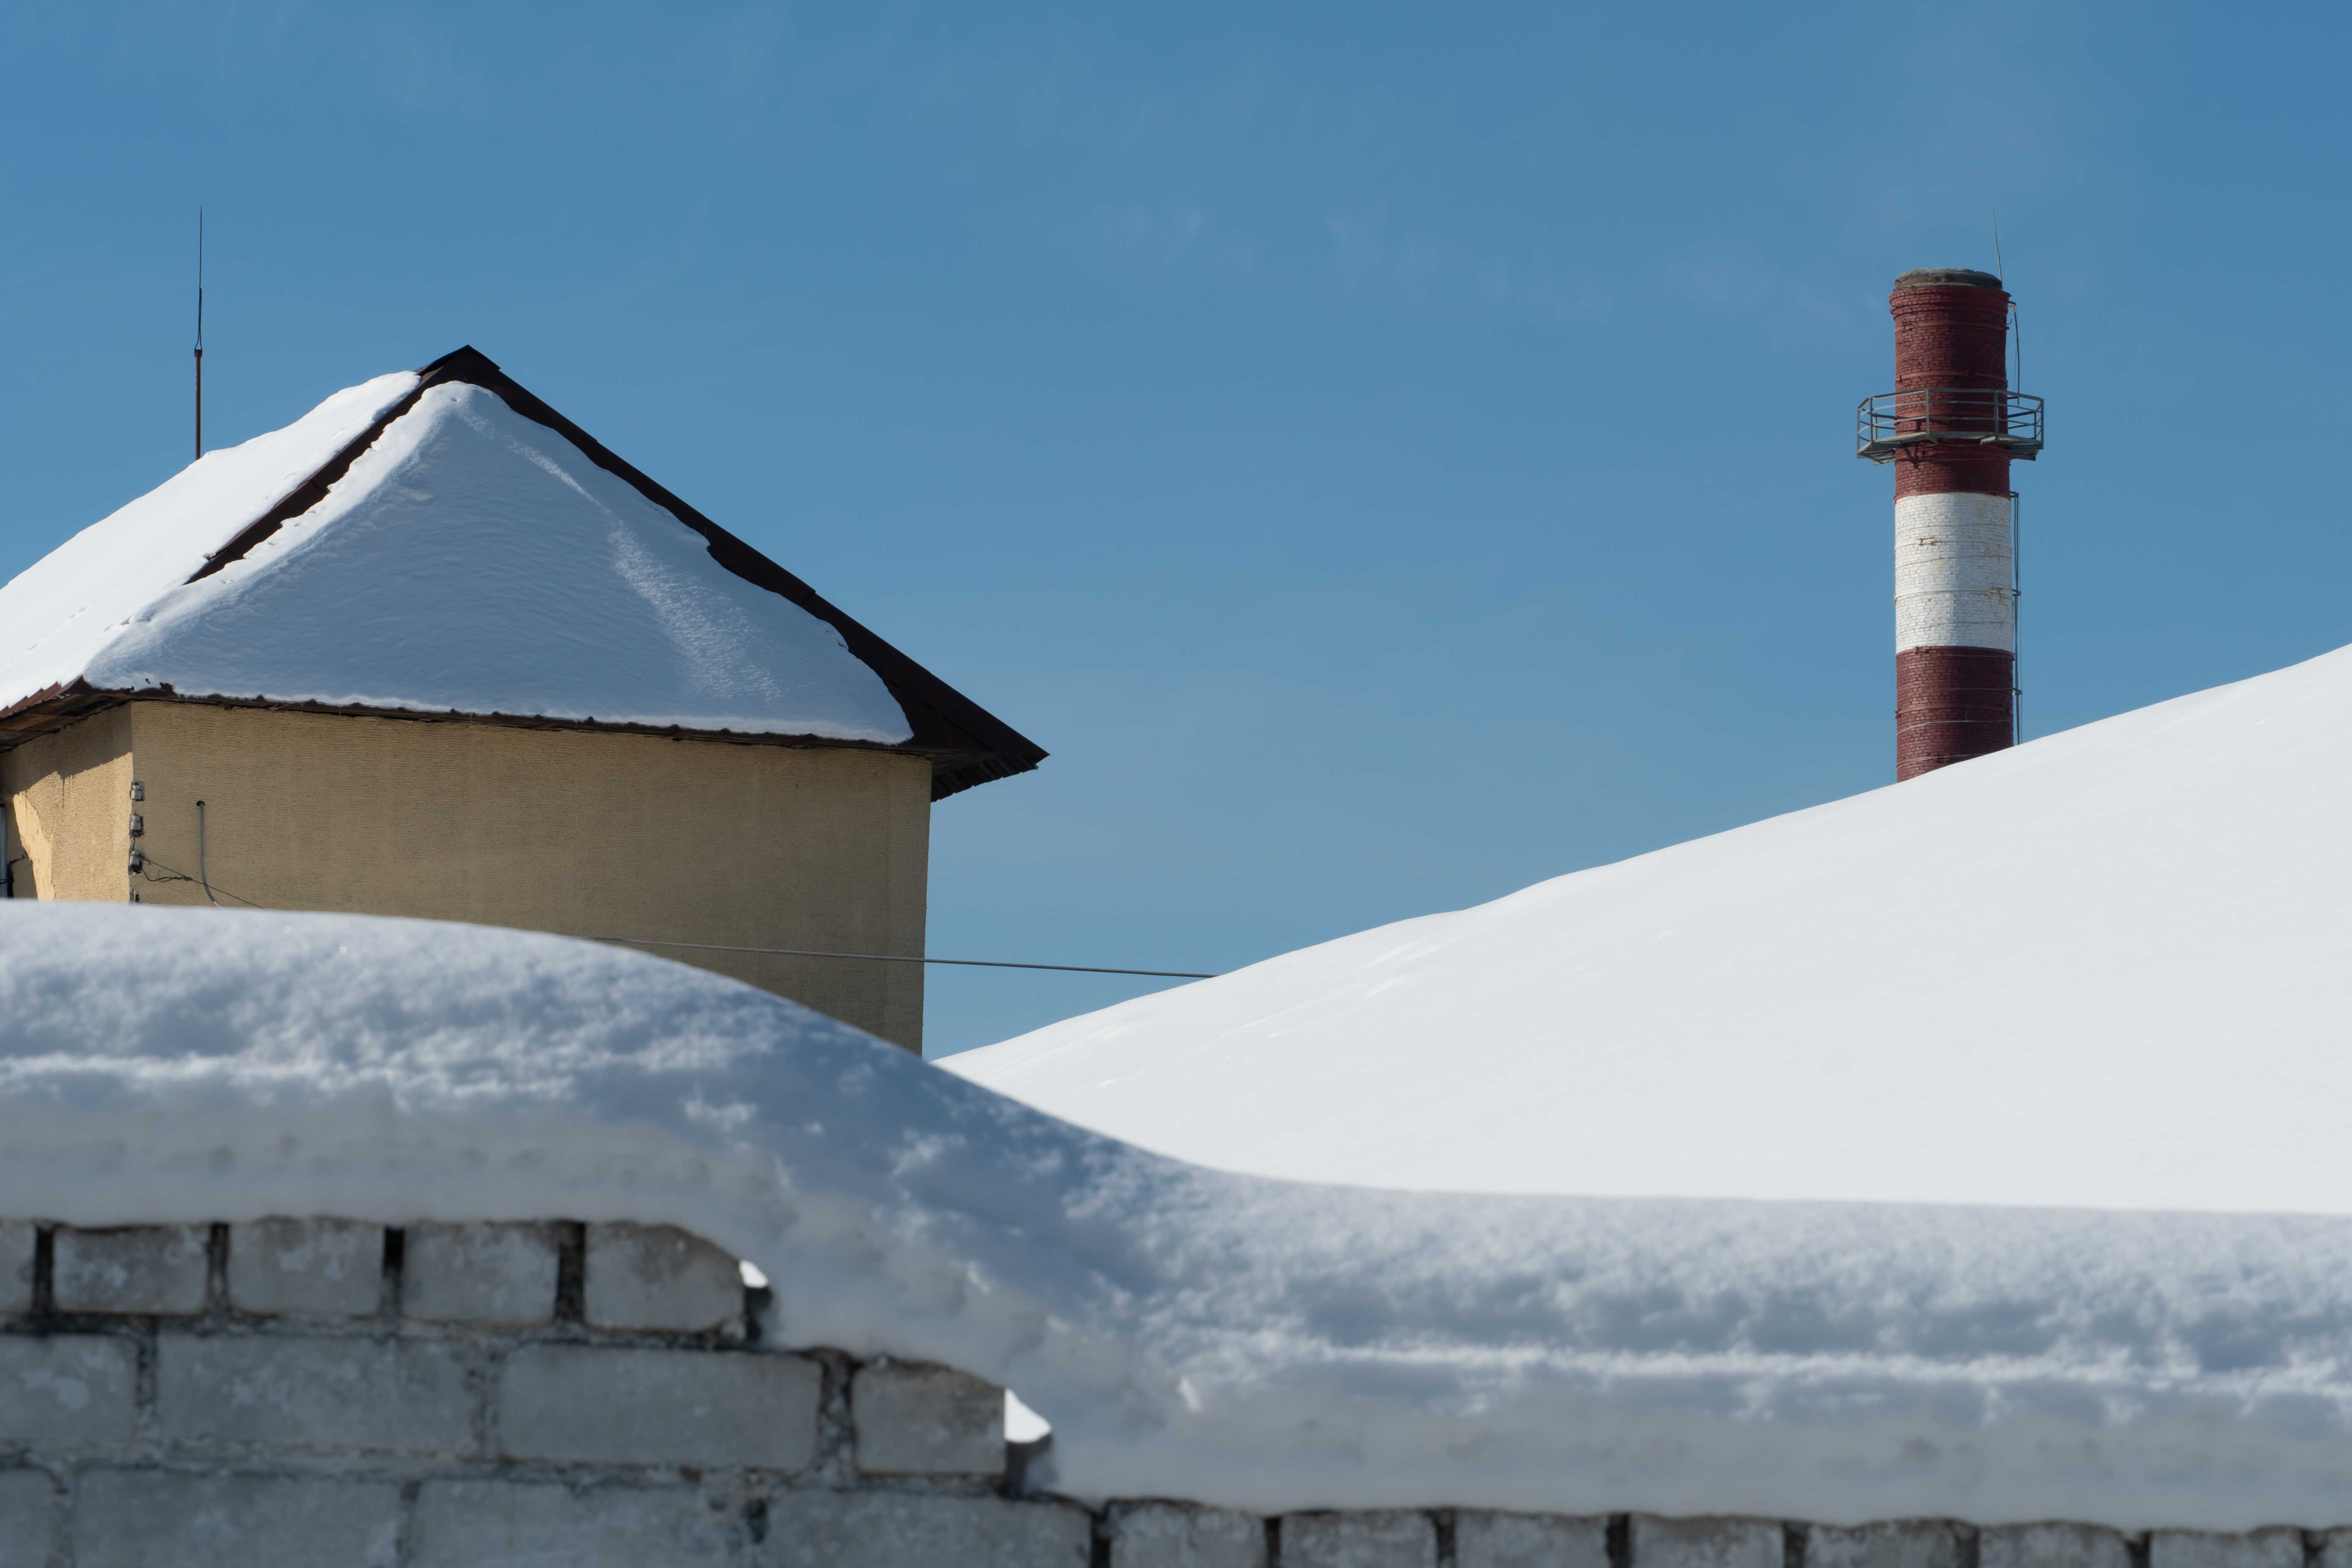 Image showing snow on roofs of a building